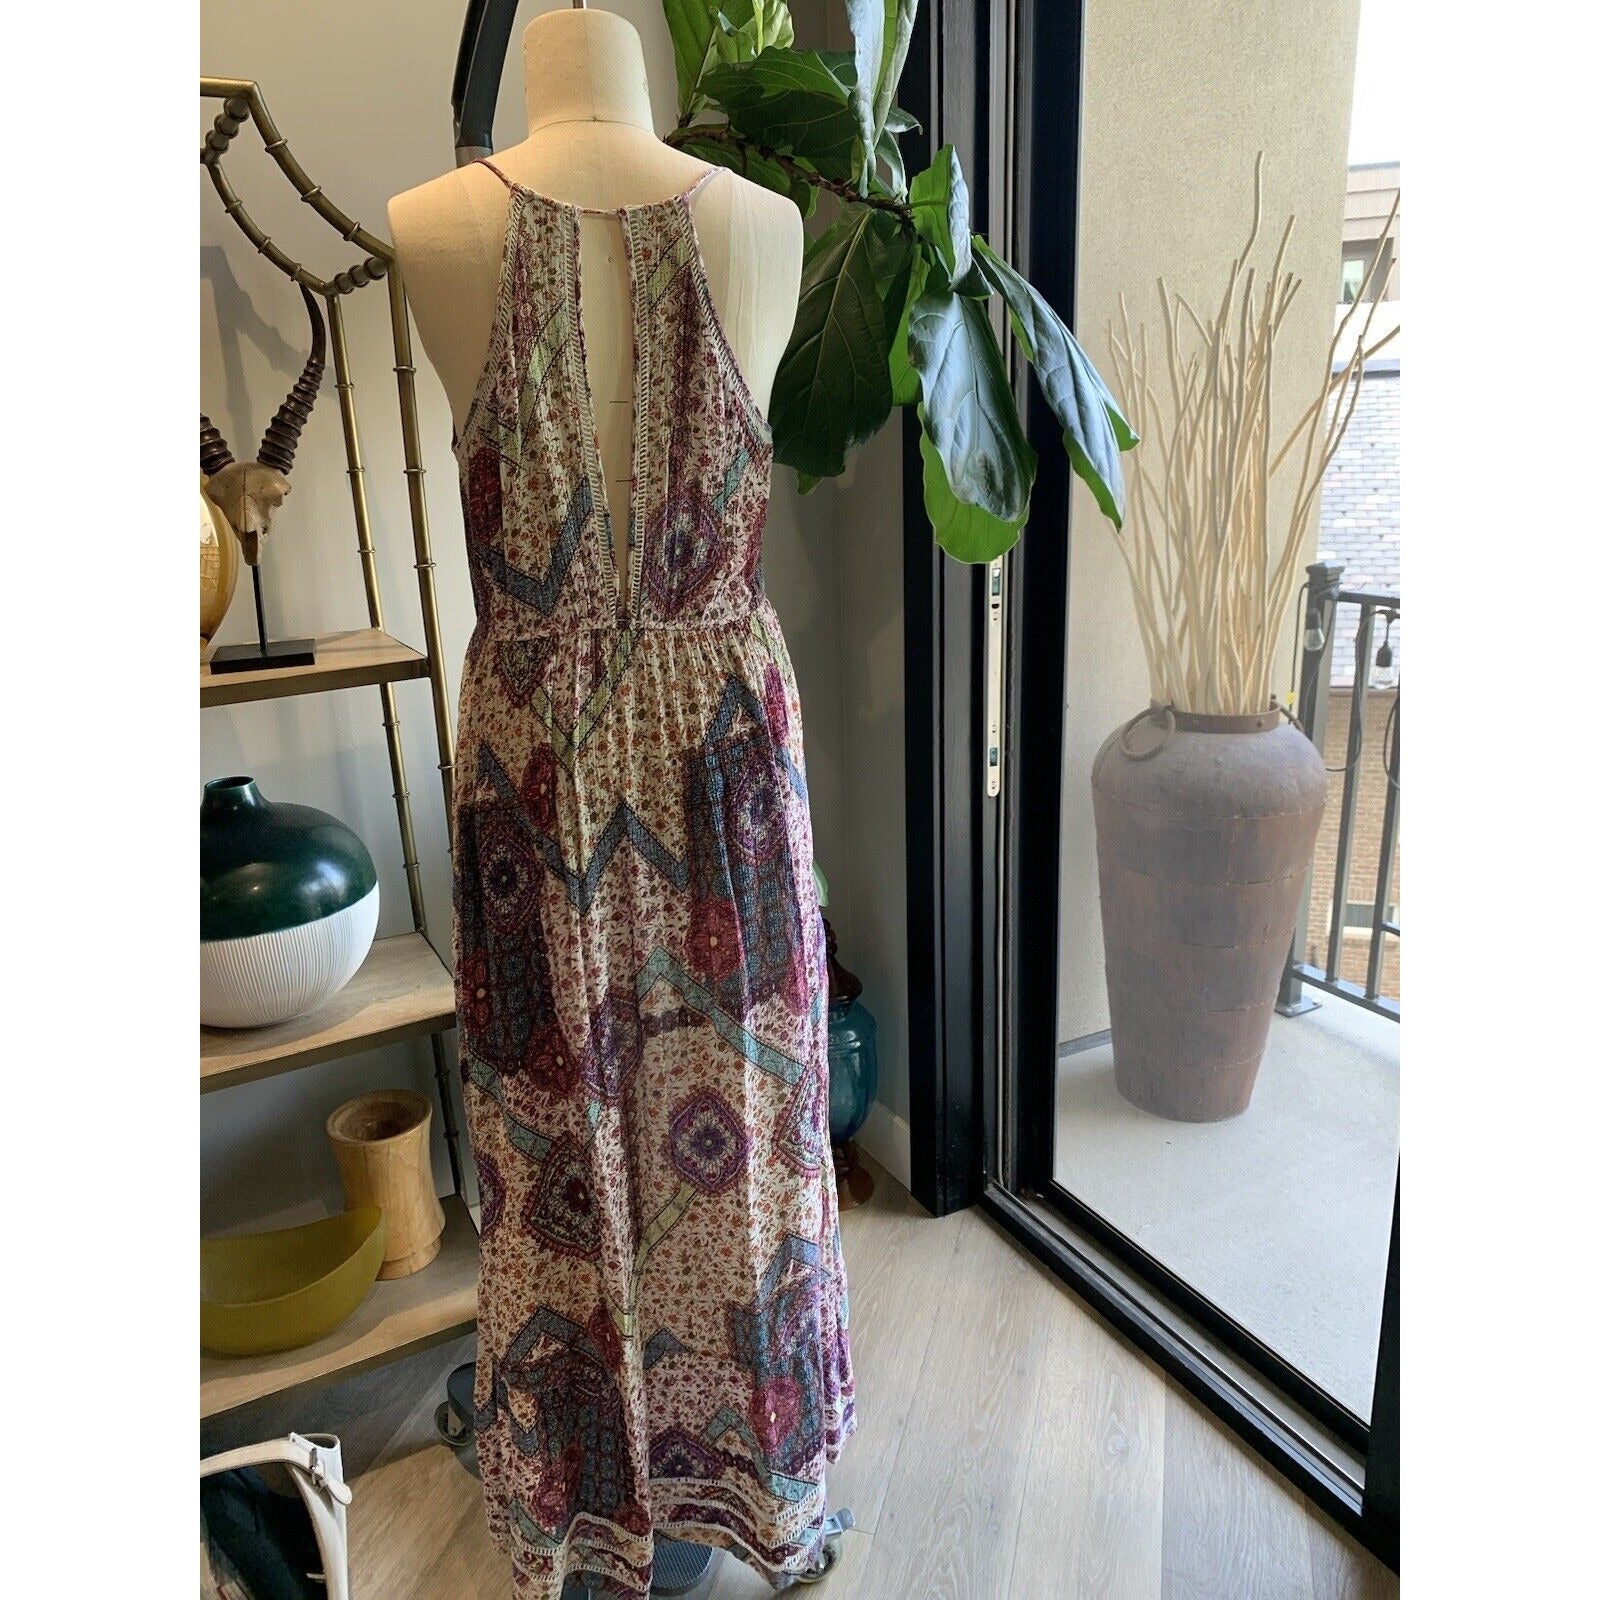 Back View Of Printed Maxi Dress